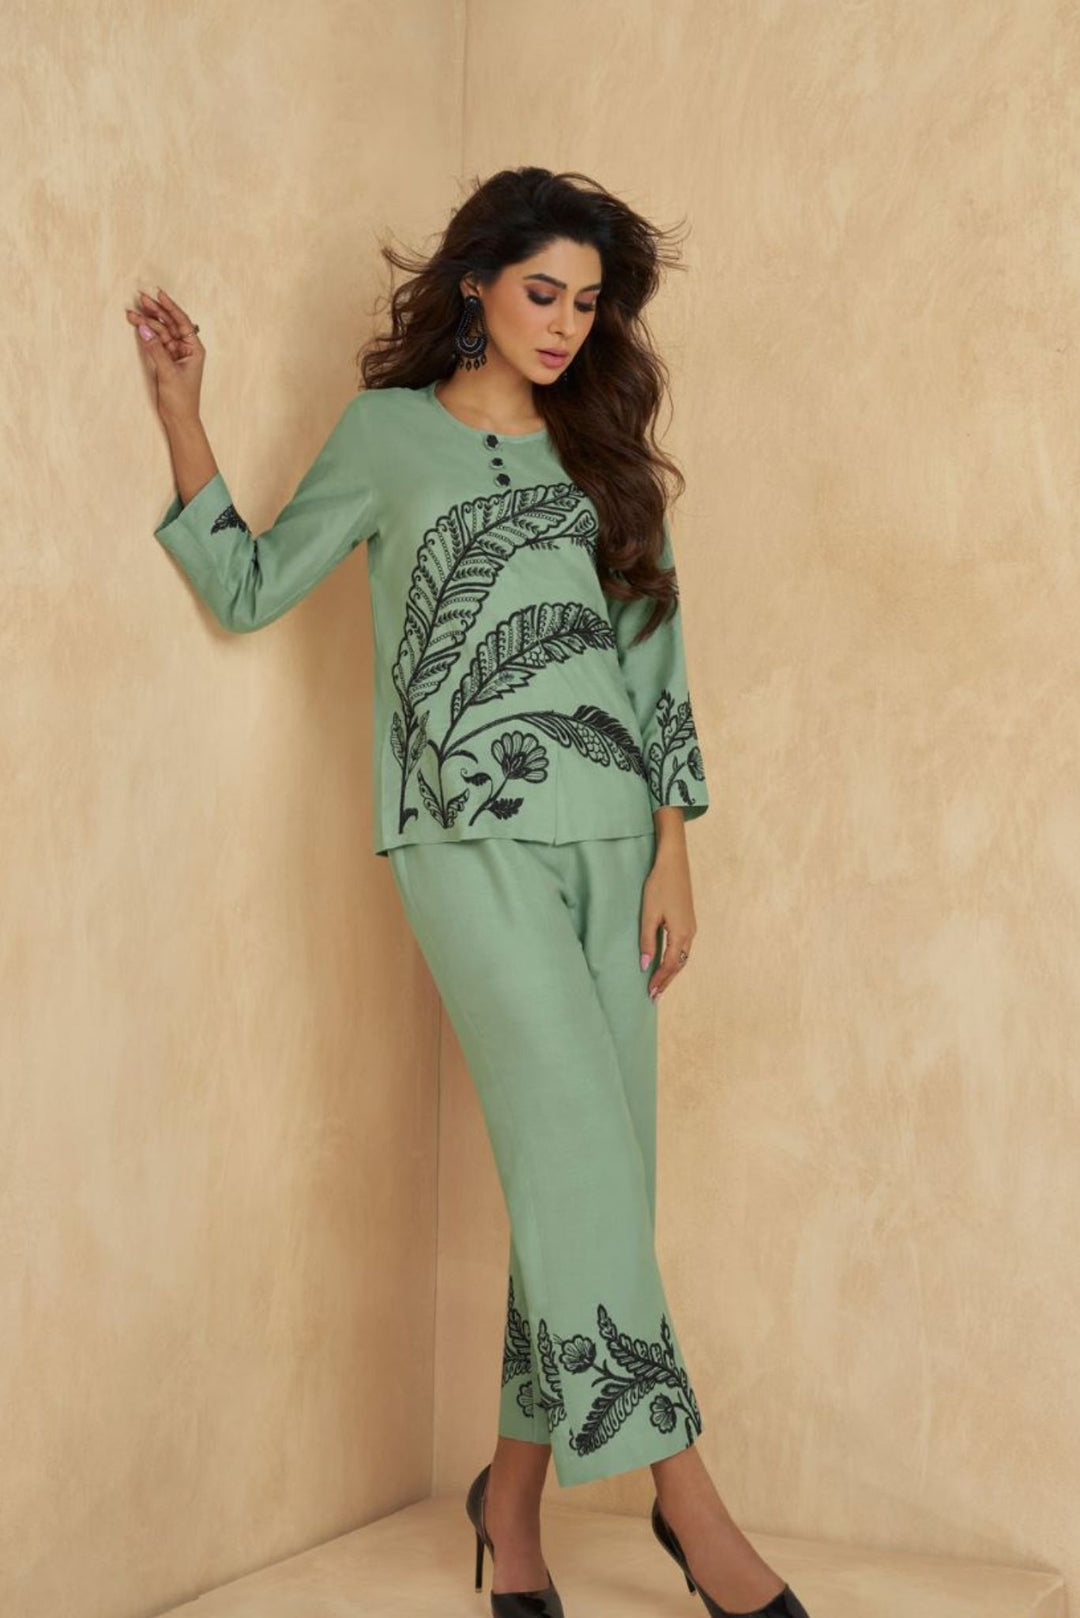 Ethnic wear two piece outfit sets